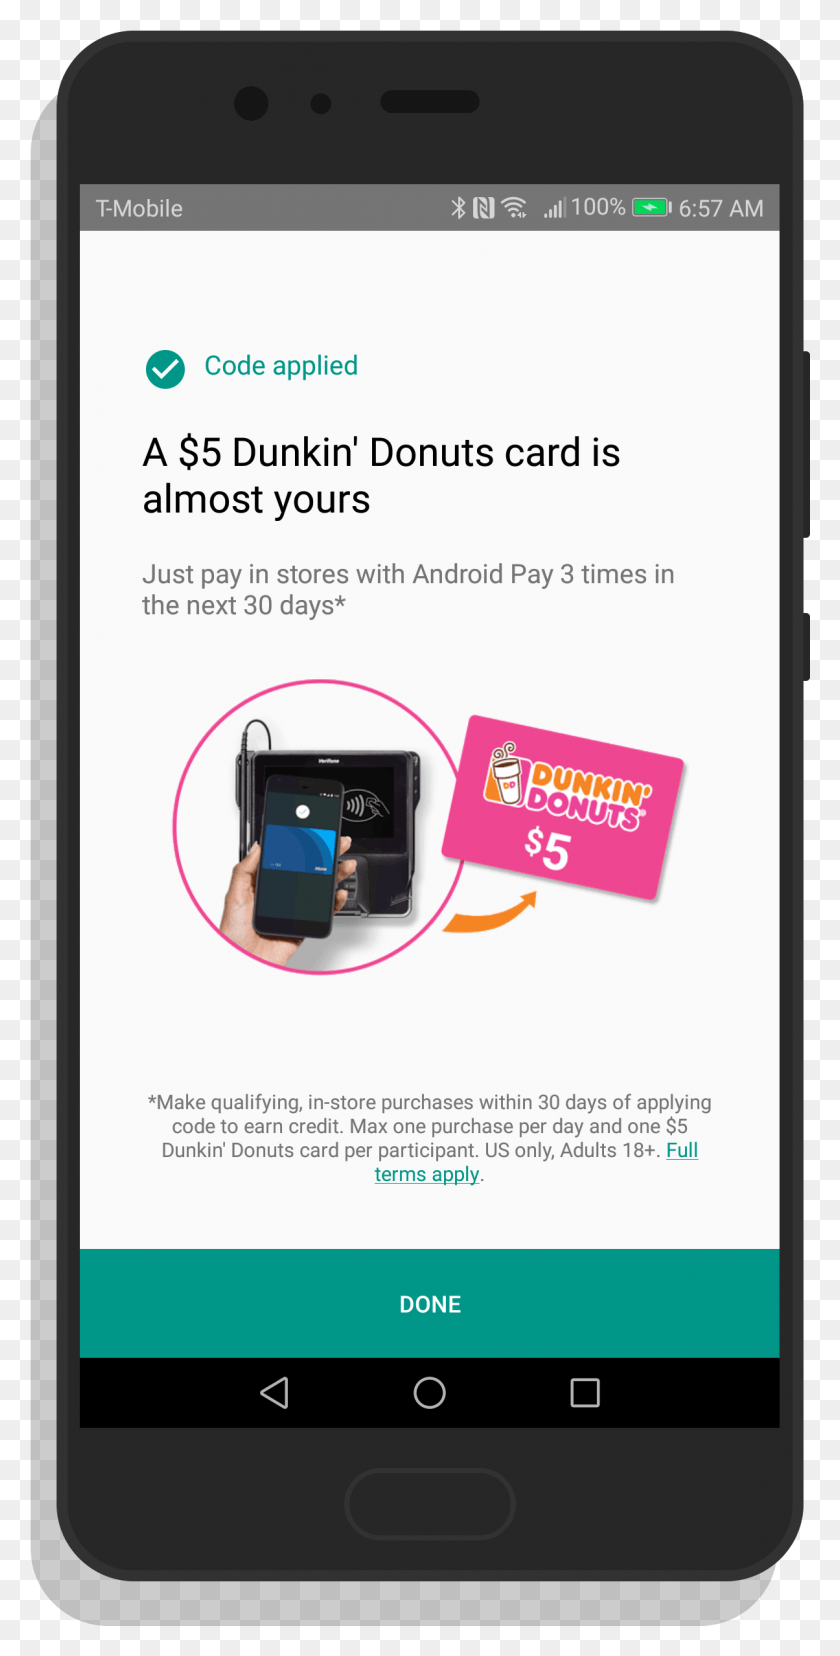 1204x2464 Descargar Png Android Pay Dunkin Donuts Promo Iphone, Teléfono Móvil, Electrónica Hd Png